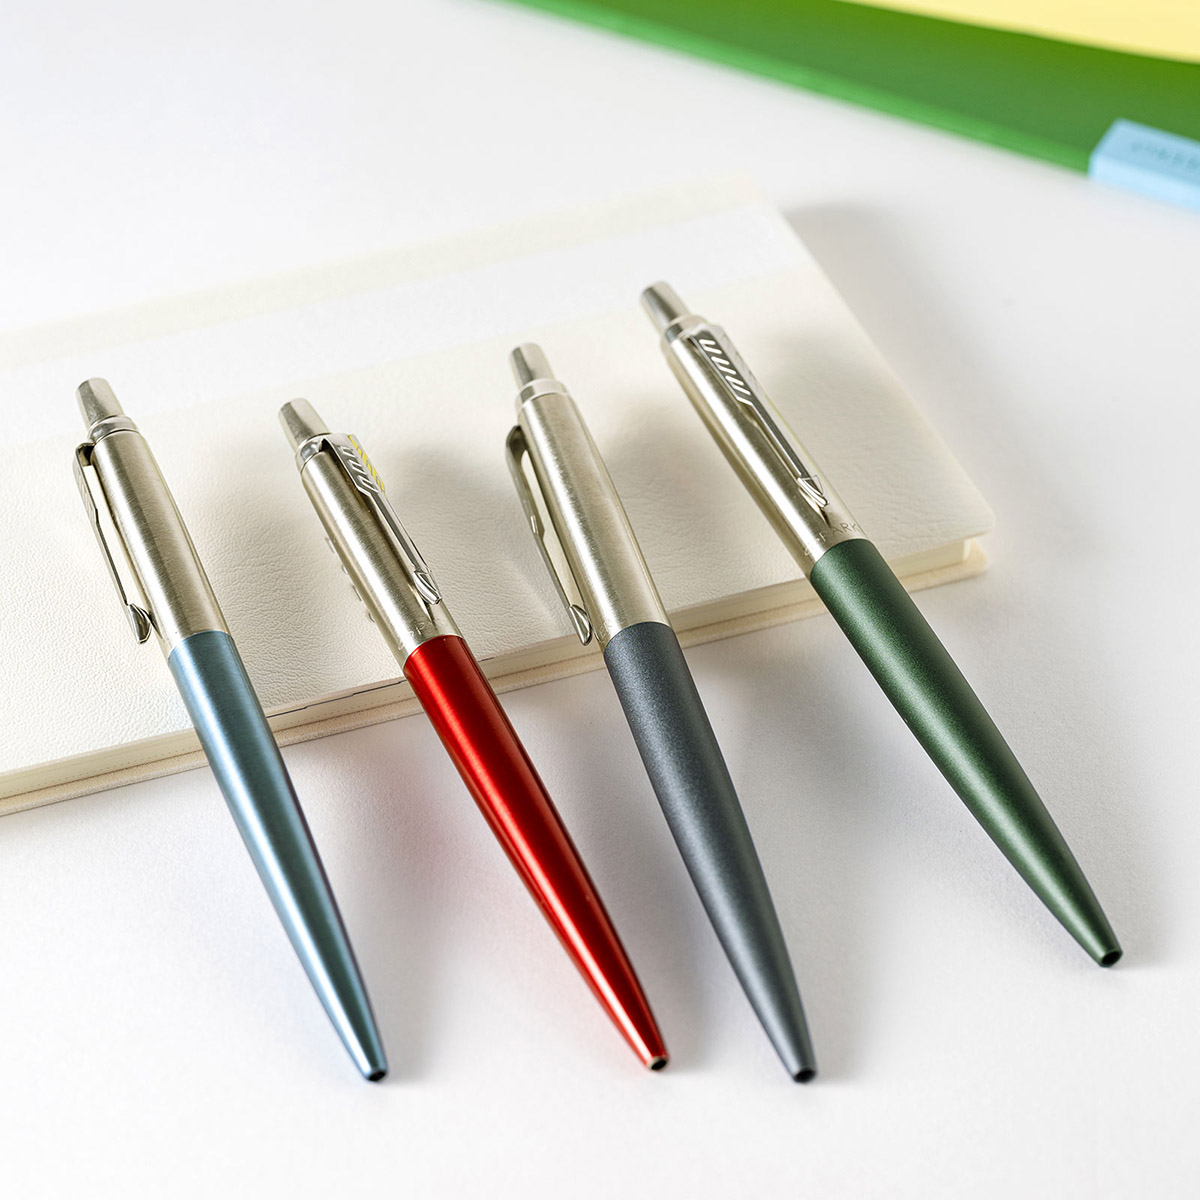 Jotter Pens Collection